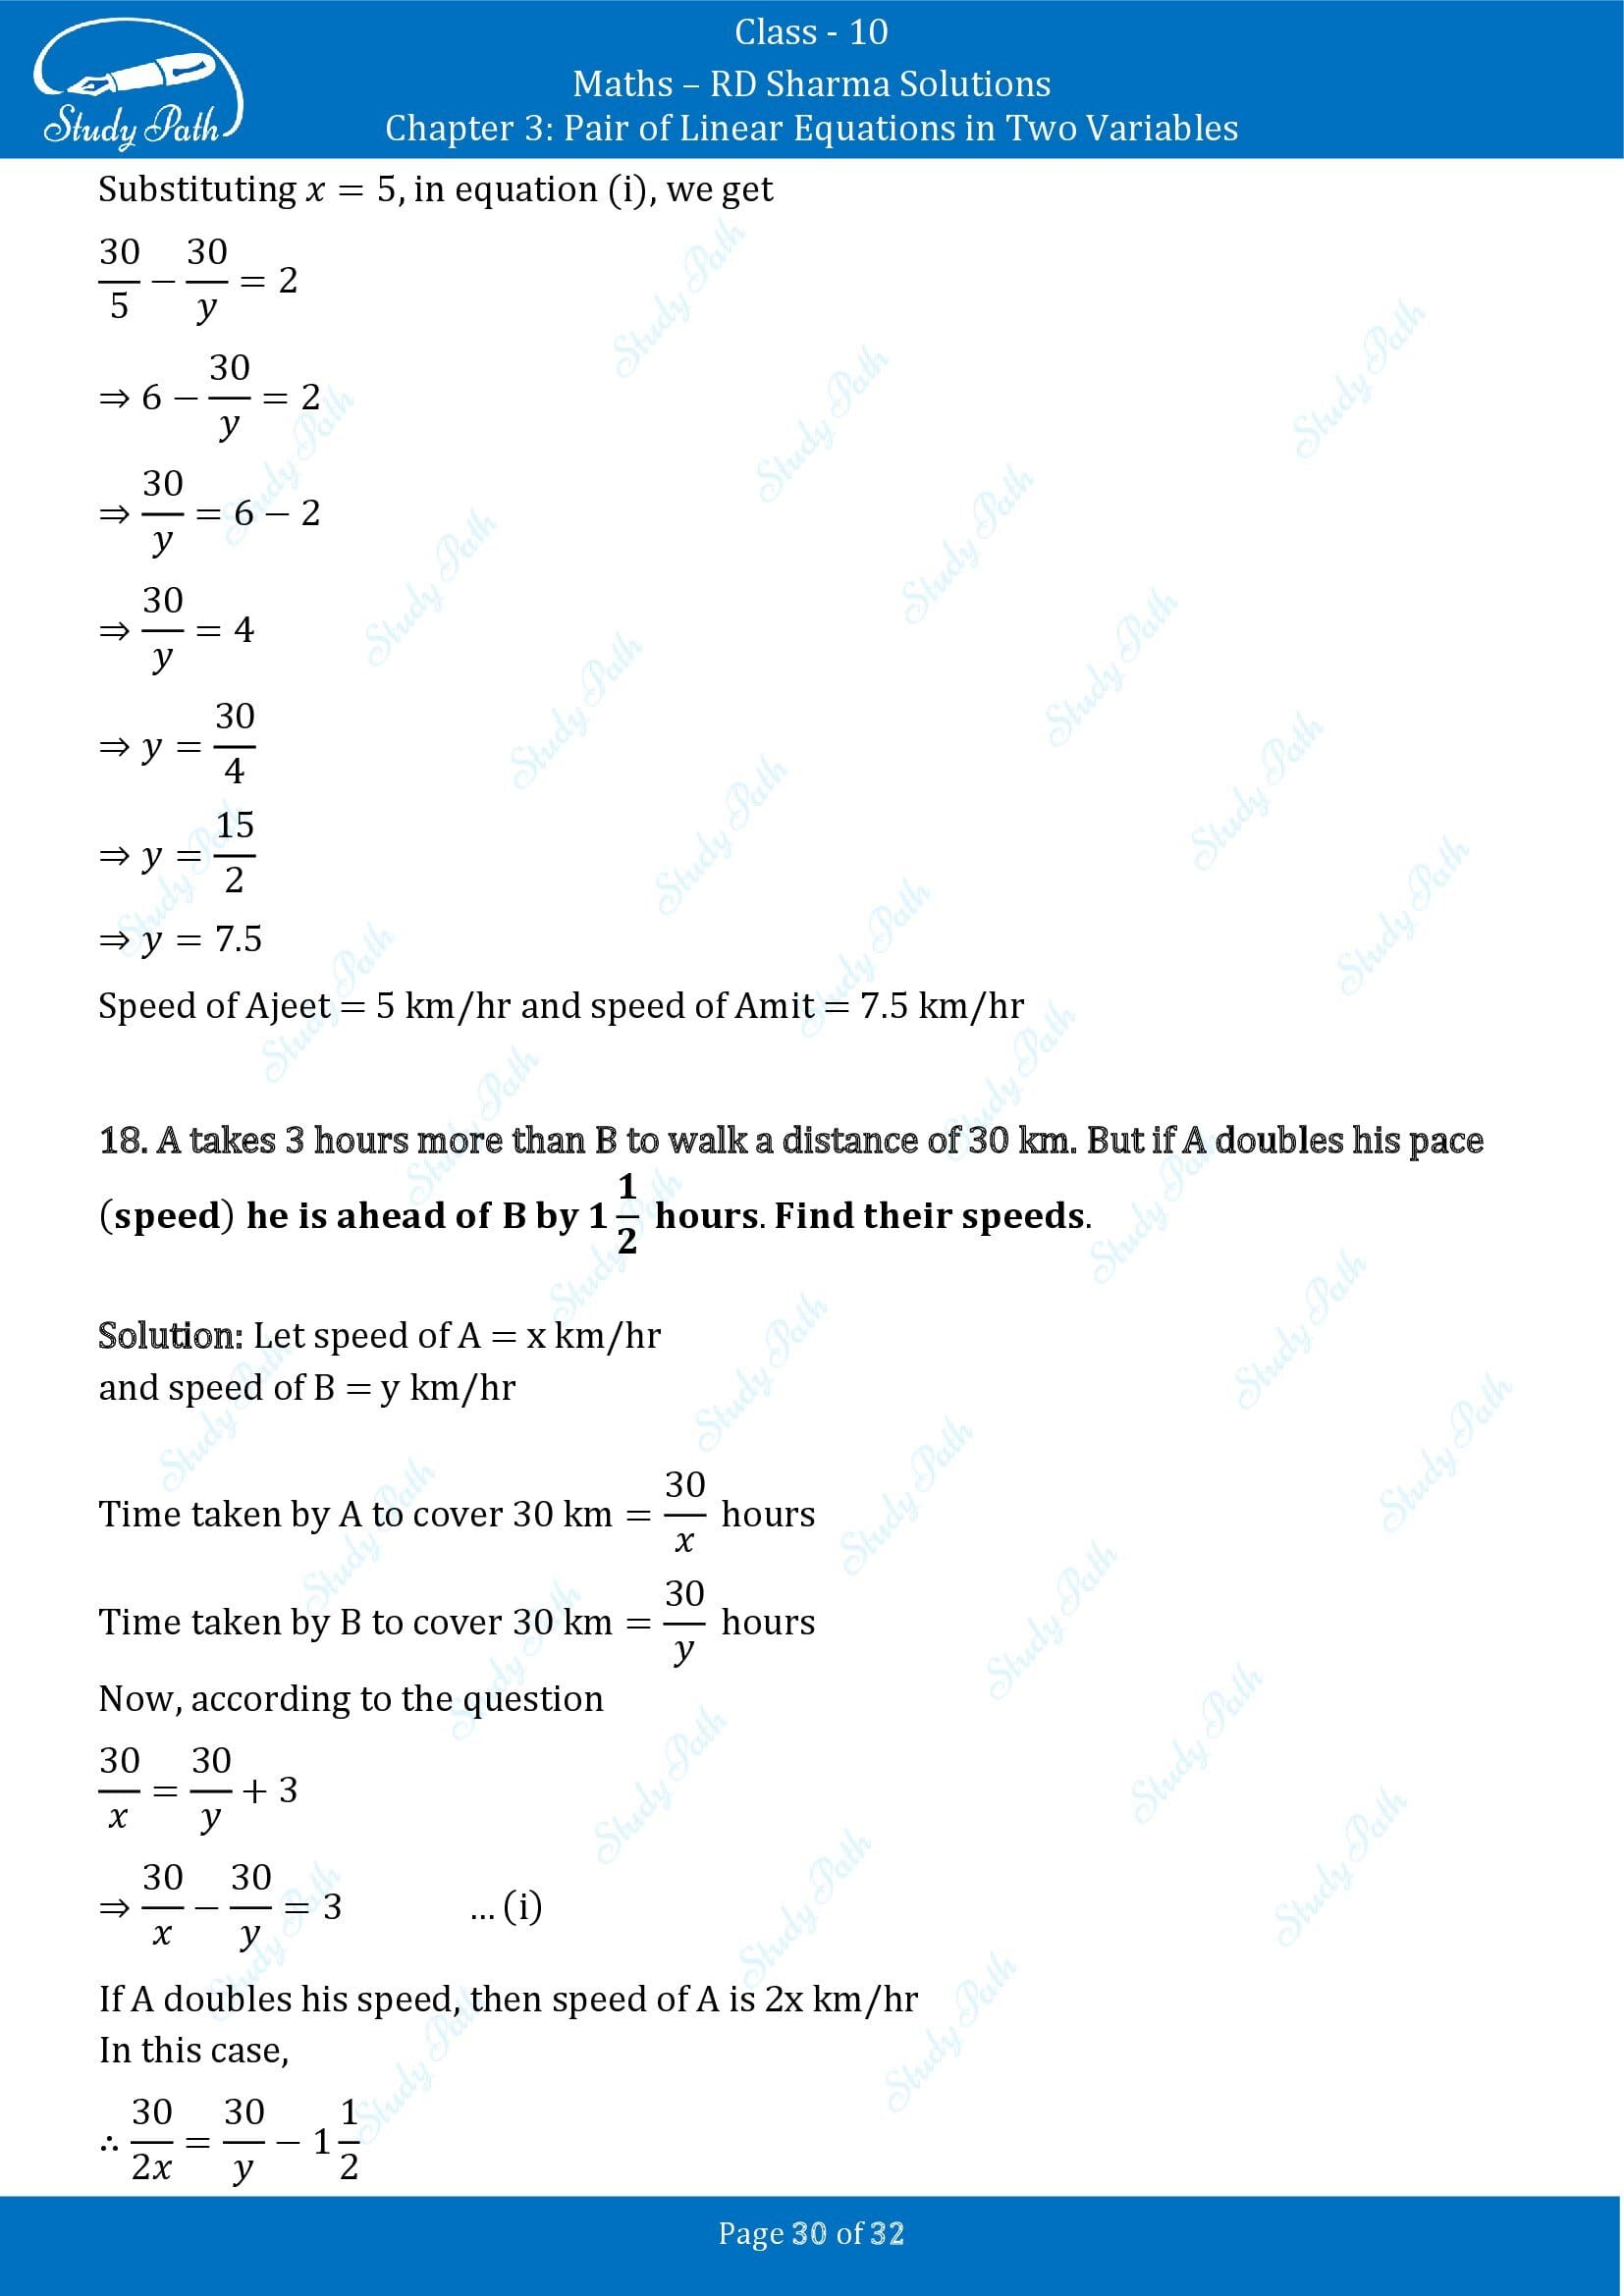 RD Sharma Solutions Class 10 Chapter 3 Pair of Linear Equations in Two Variables Exercise 3.10 00030